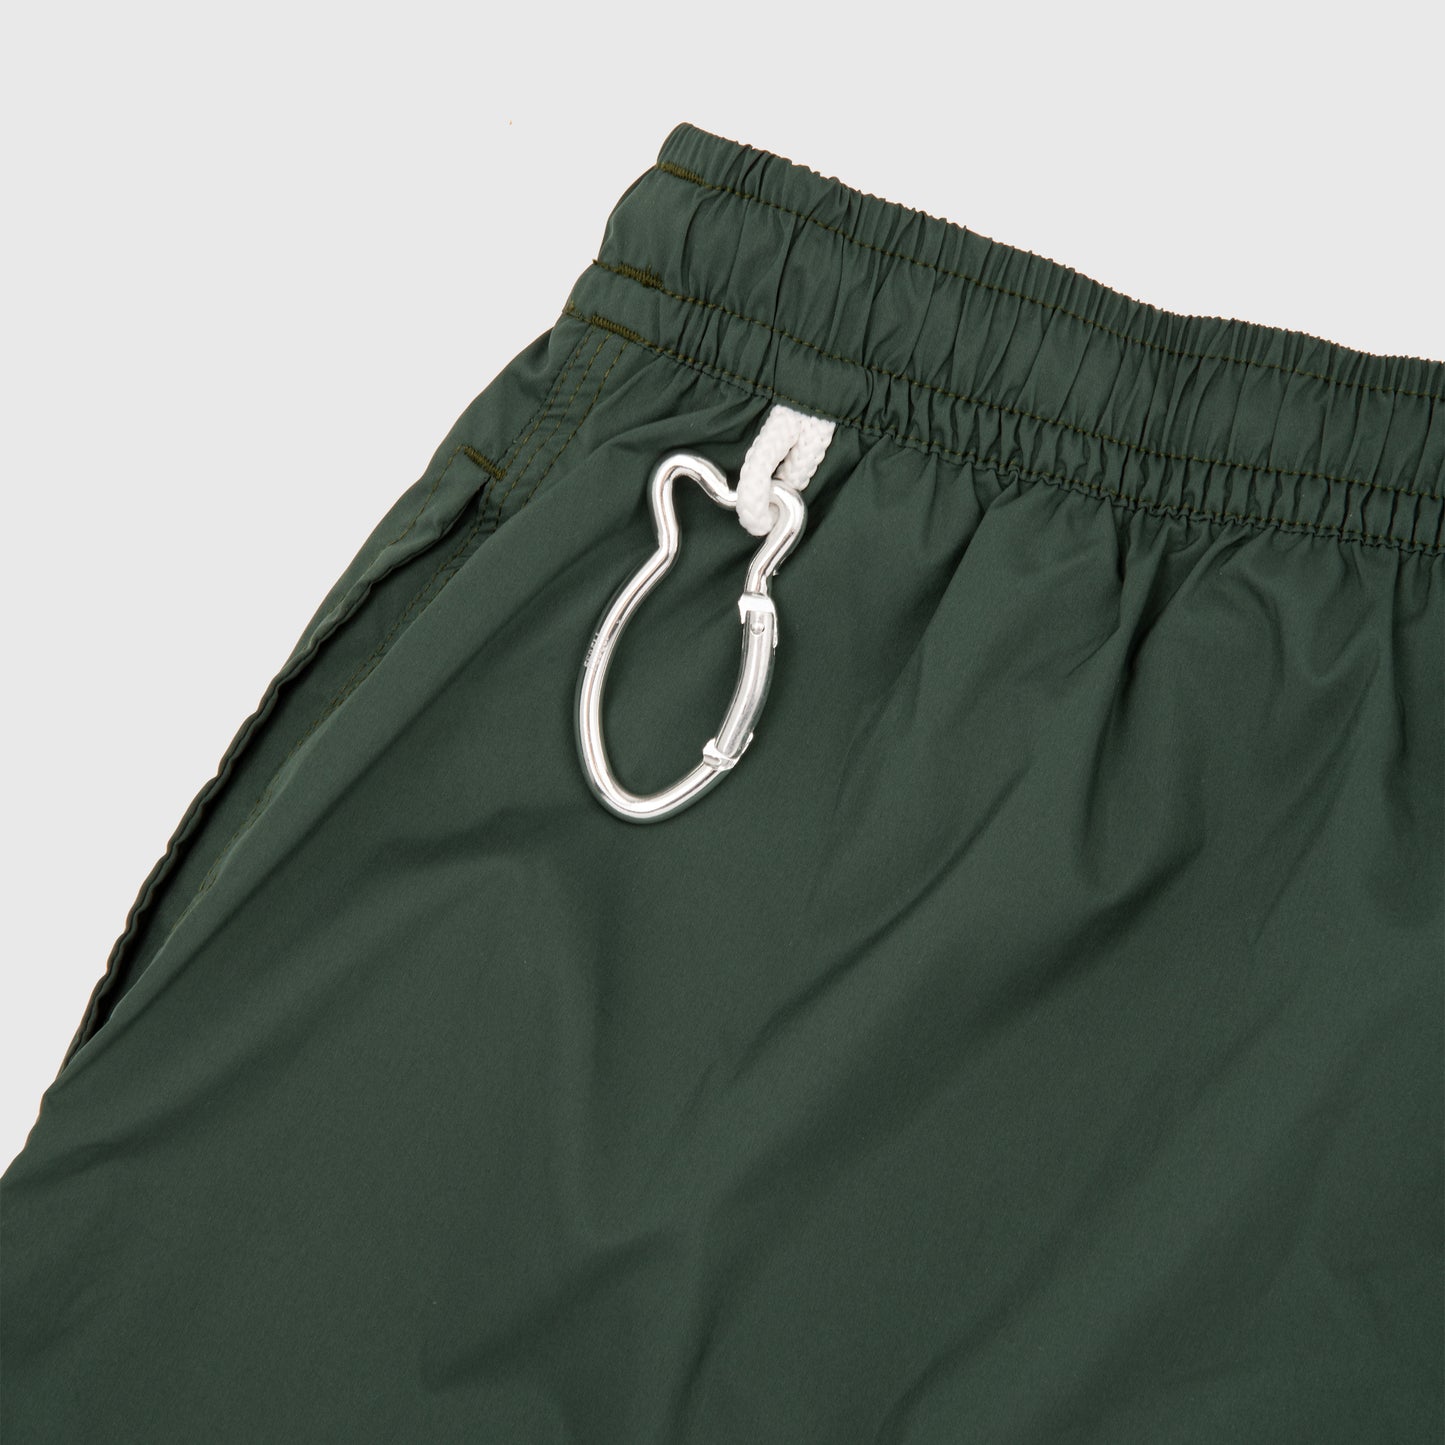 Madeira Solid Color Swim Trunk Green 404